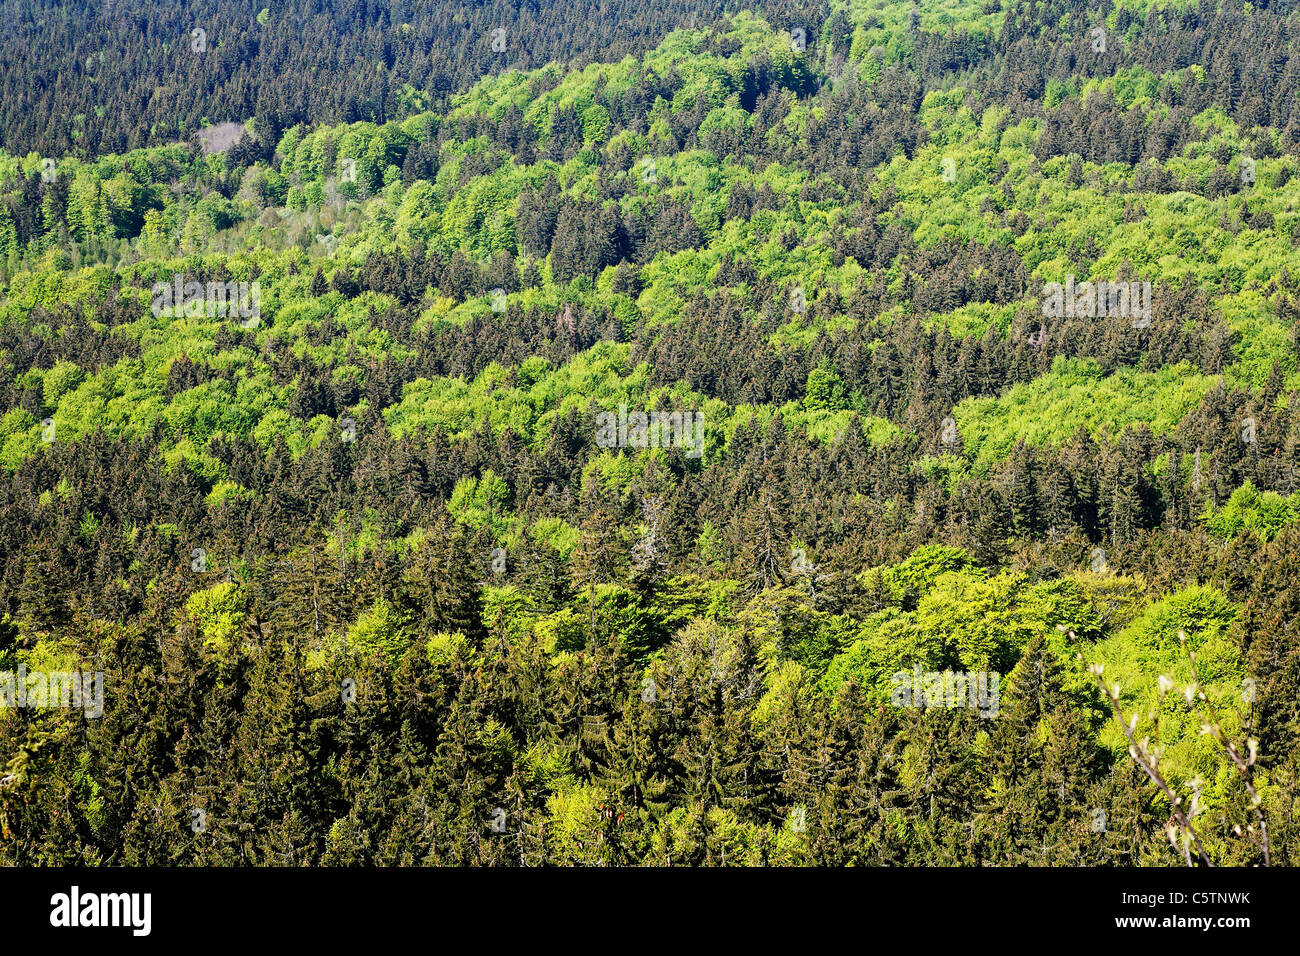 Germany, Lower Bavaria, Bavarian Forest, View of mixed forest Stock Photo